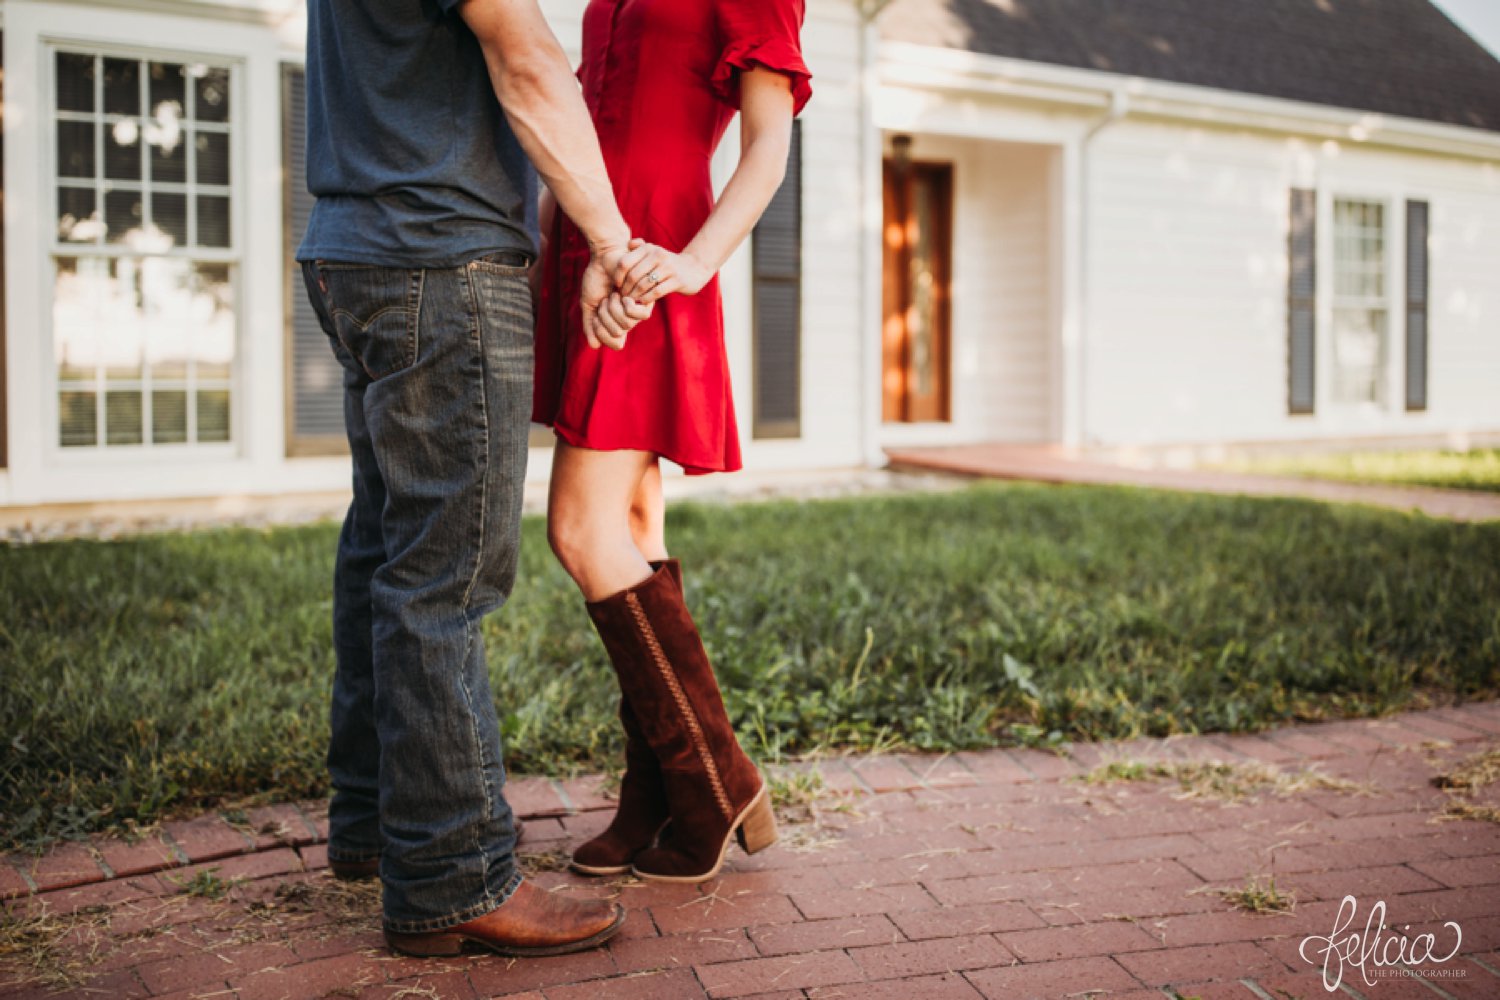 images by feliciathephotographer.com | destination wedding photographer | engagement | farmhouse | country | kansas city | sweet southern | red dress | nordstrom rack | unique halo diamond ring | casual | brown boots | amazon | cowboy | 